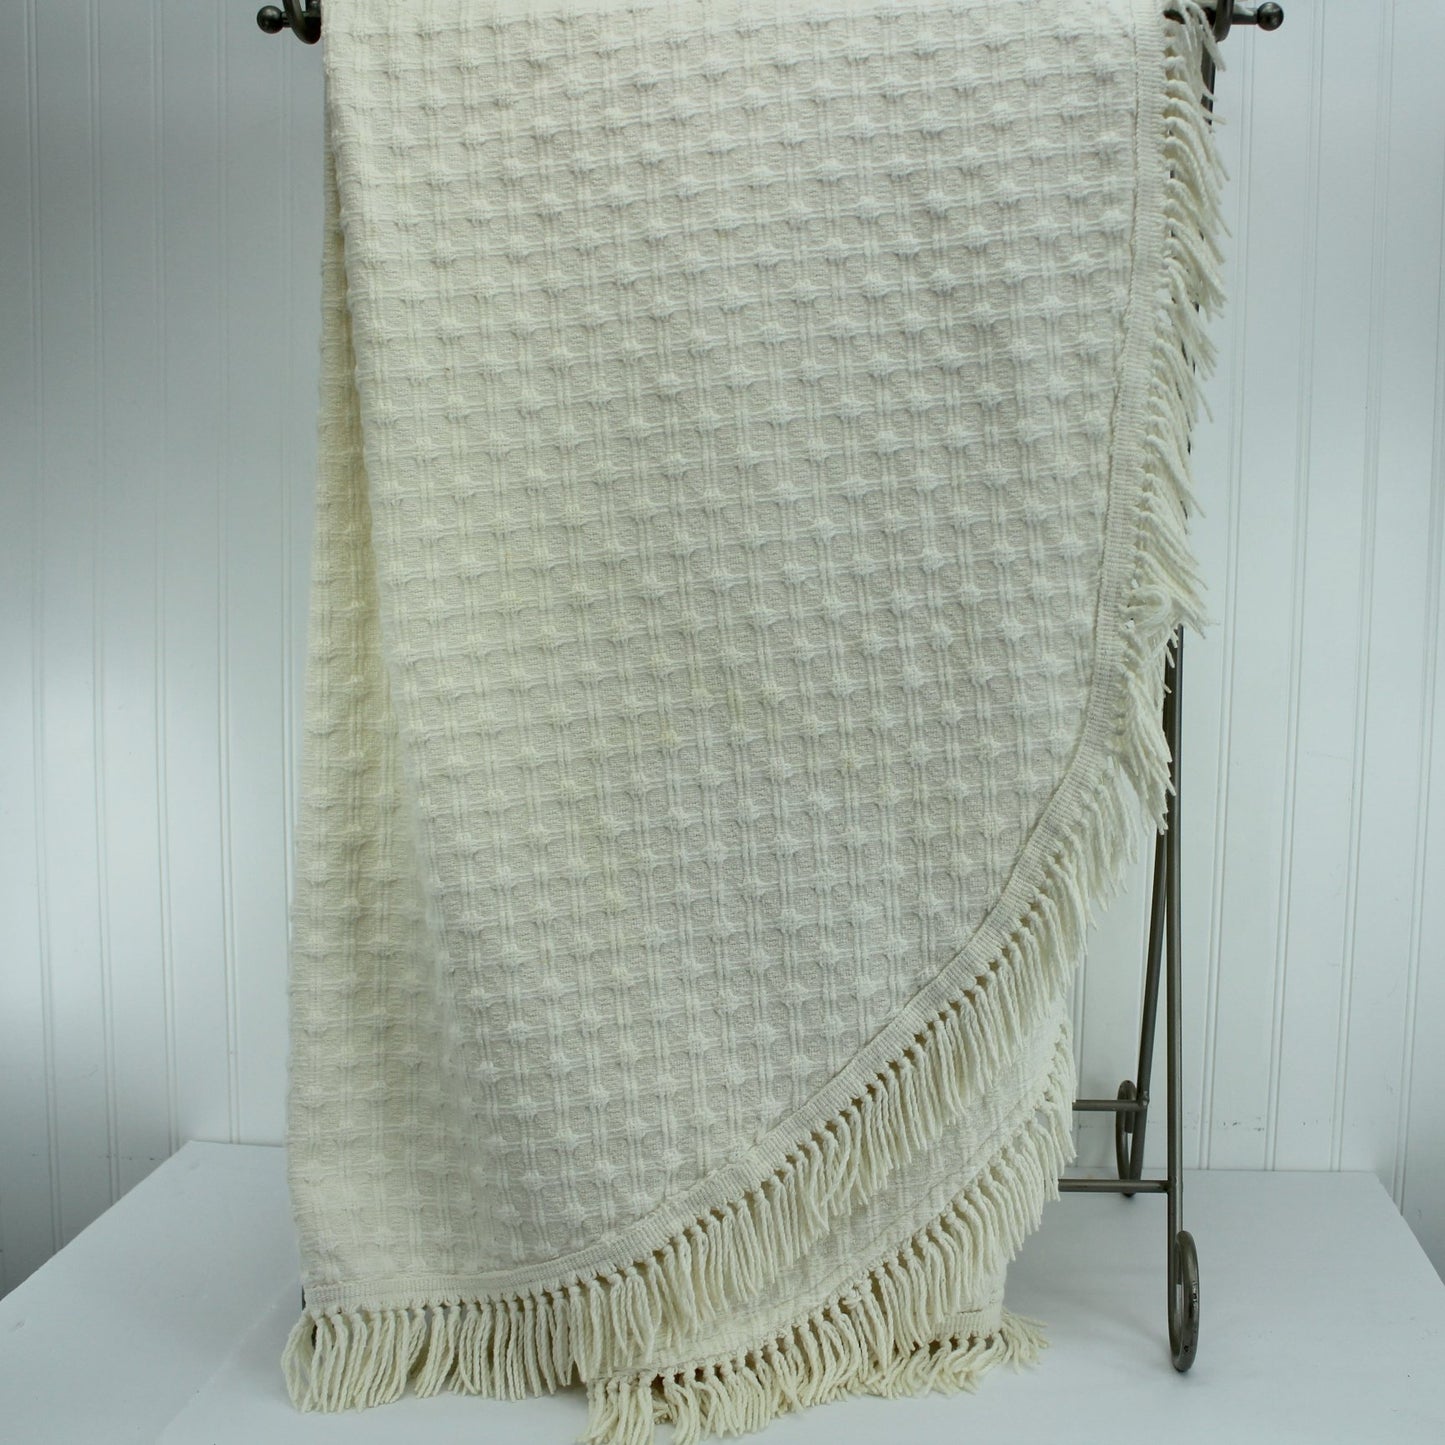 Woven Cotton Bedspread Off White Ivory Basket Weave Design long view of bedspread